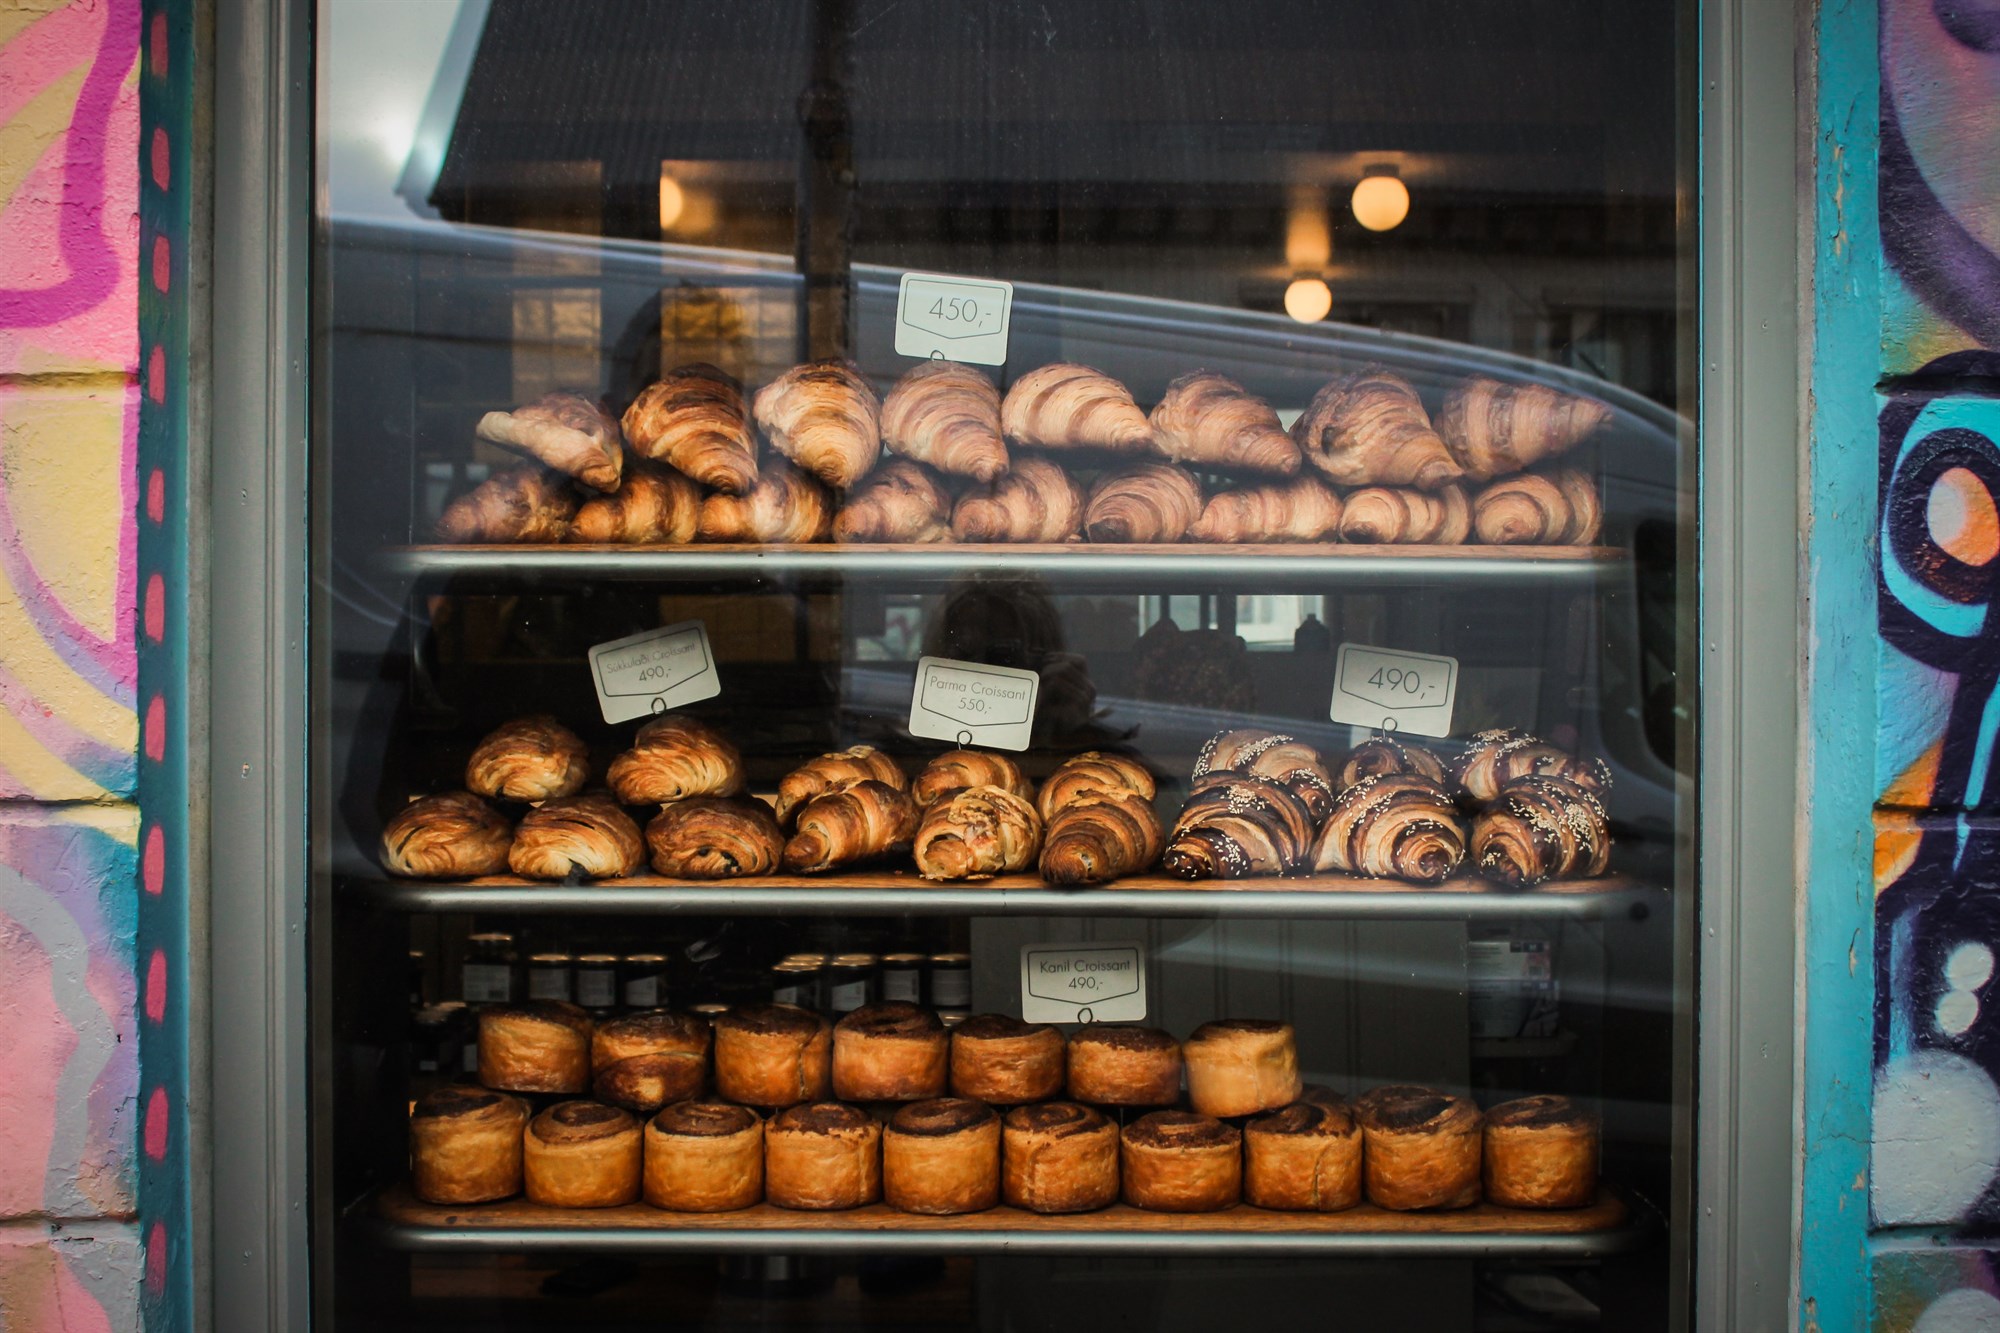 Piles of pastries in a window of Brauð & Co in Reykjavik, Iceland.